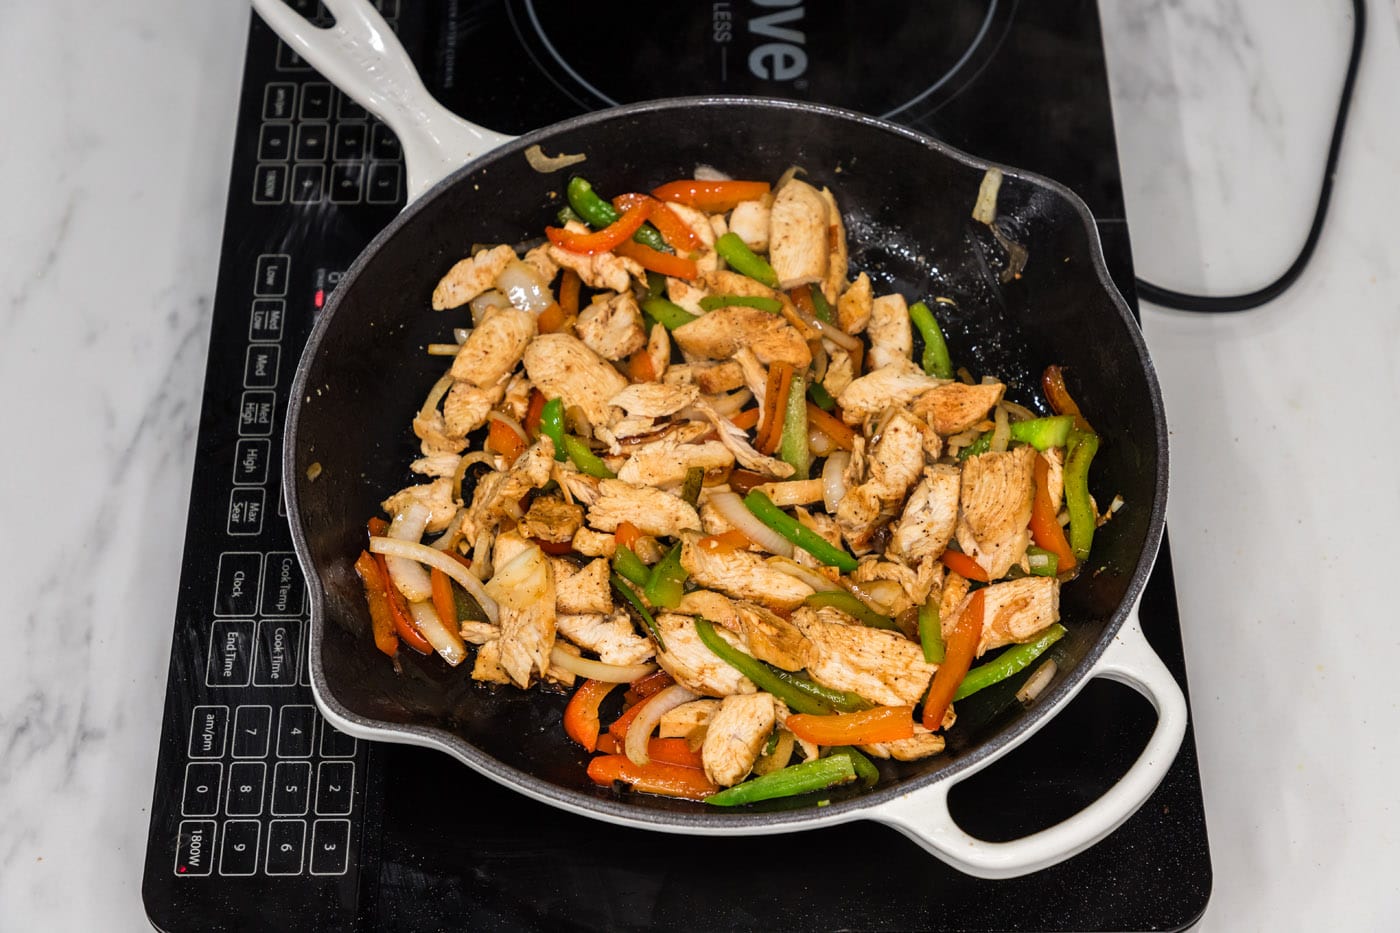 sliced chicken added to skillet with bell peppers and onion